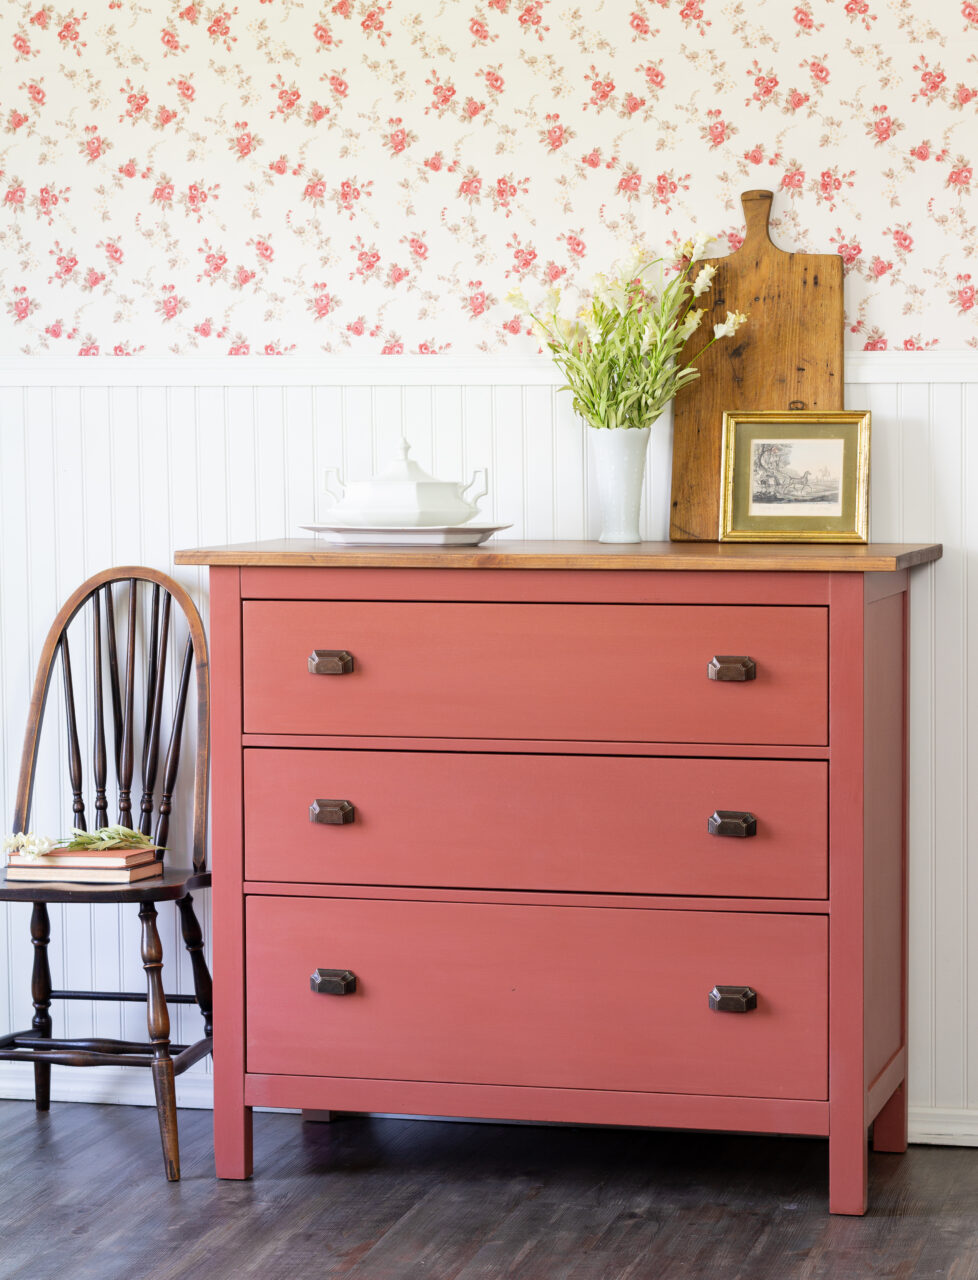 dresser painted in Dala Red a New Milk Paint Colour